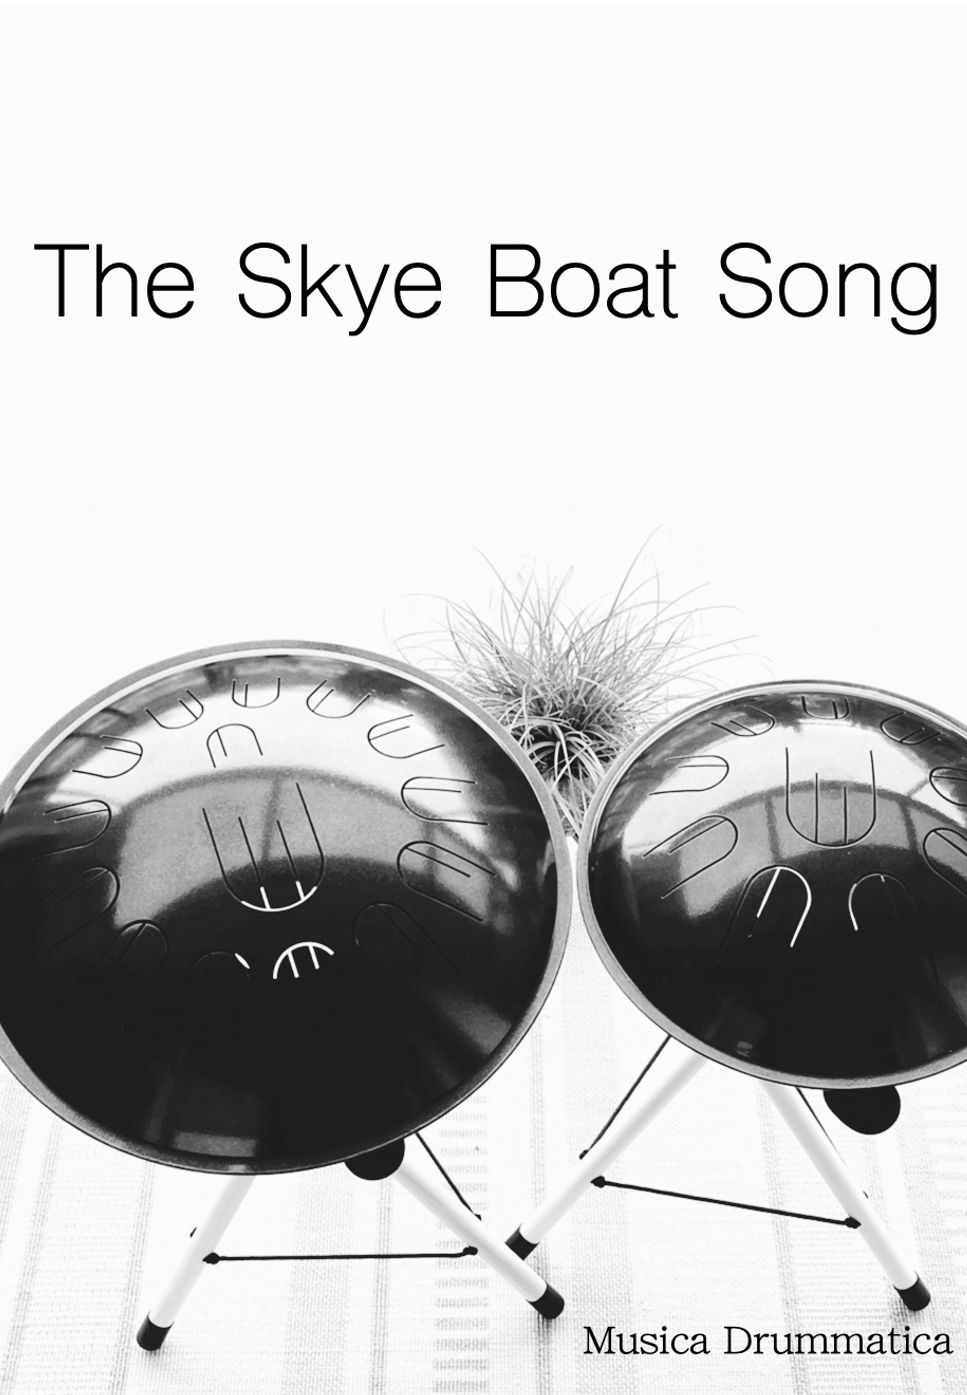 scottish song - The Skye Boat Song (with number notation) by Musica Drummatica